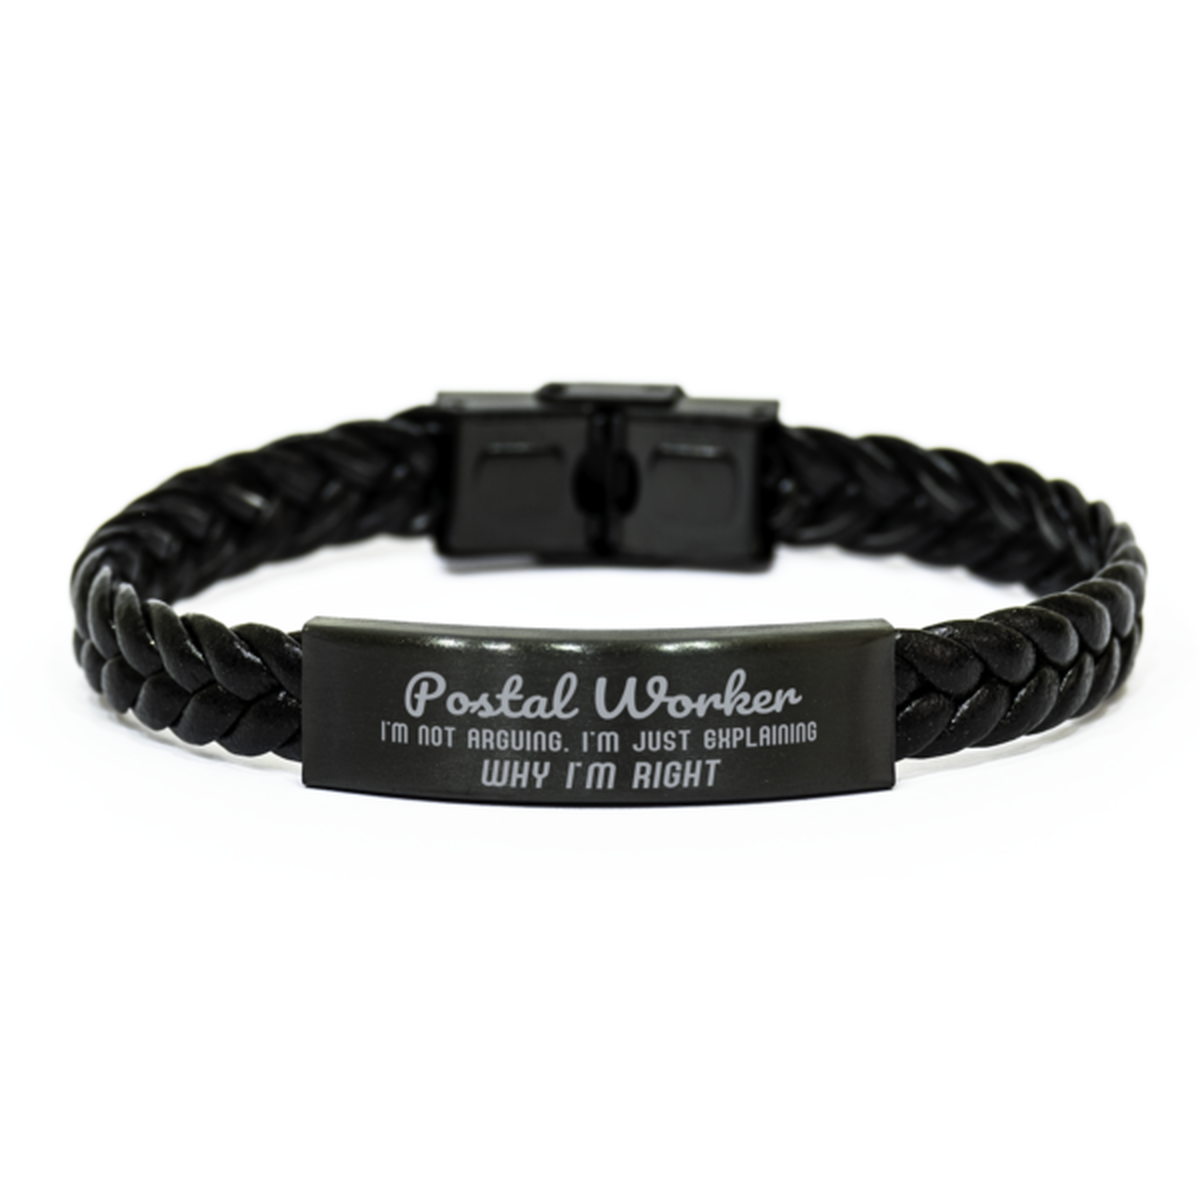 Postal Worker I'm not Arguing. I'm Just Explaining Why I'm RIGHT Braided Leather Bracelet, Graduation Birthday Christmas Postal Worker Gifts For Postal Worker Funny Saying Quote Present for Men Women Coworker